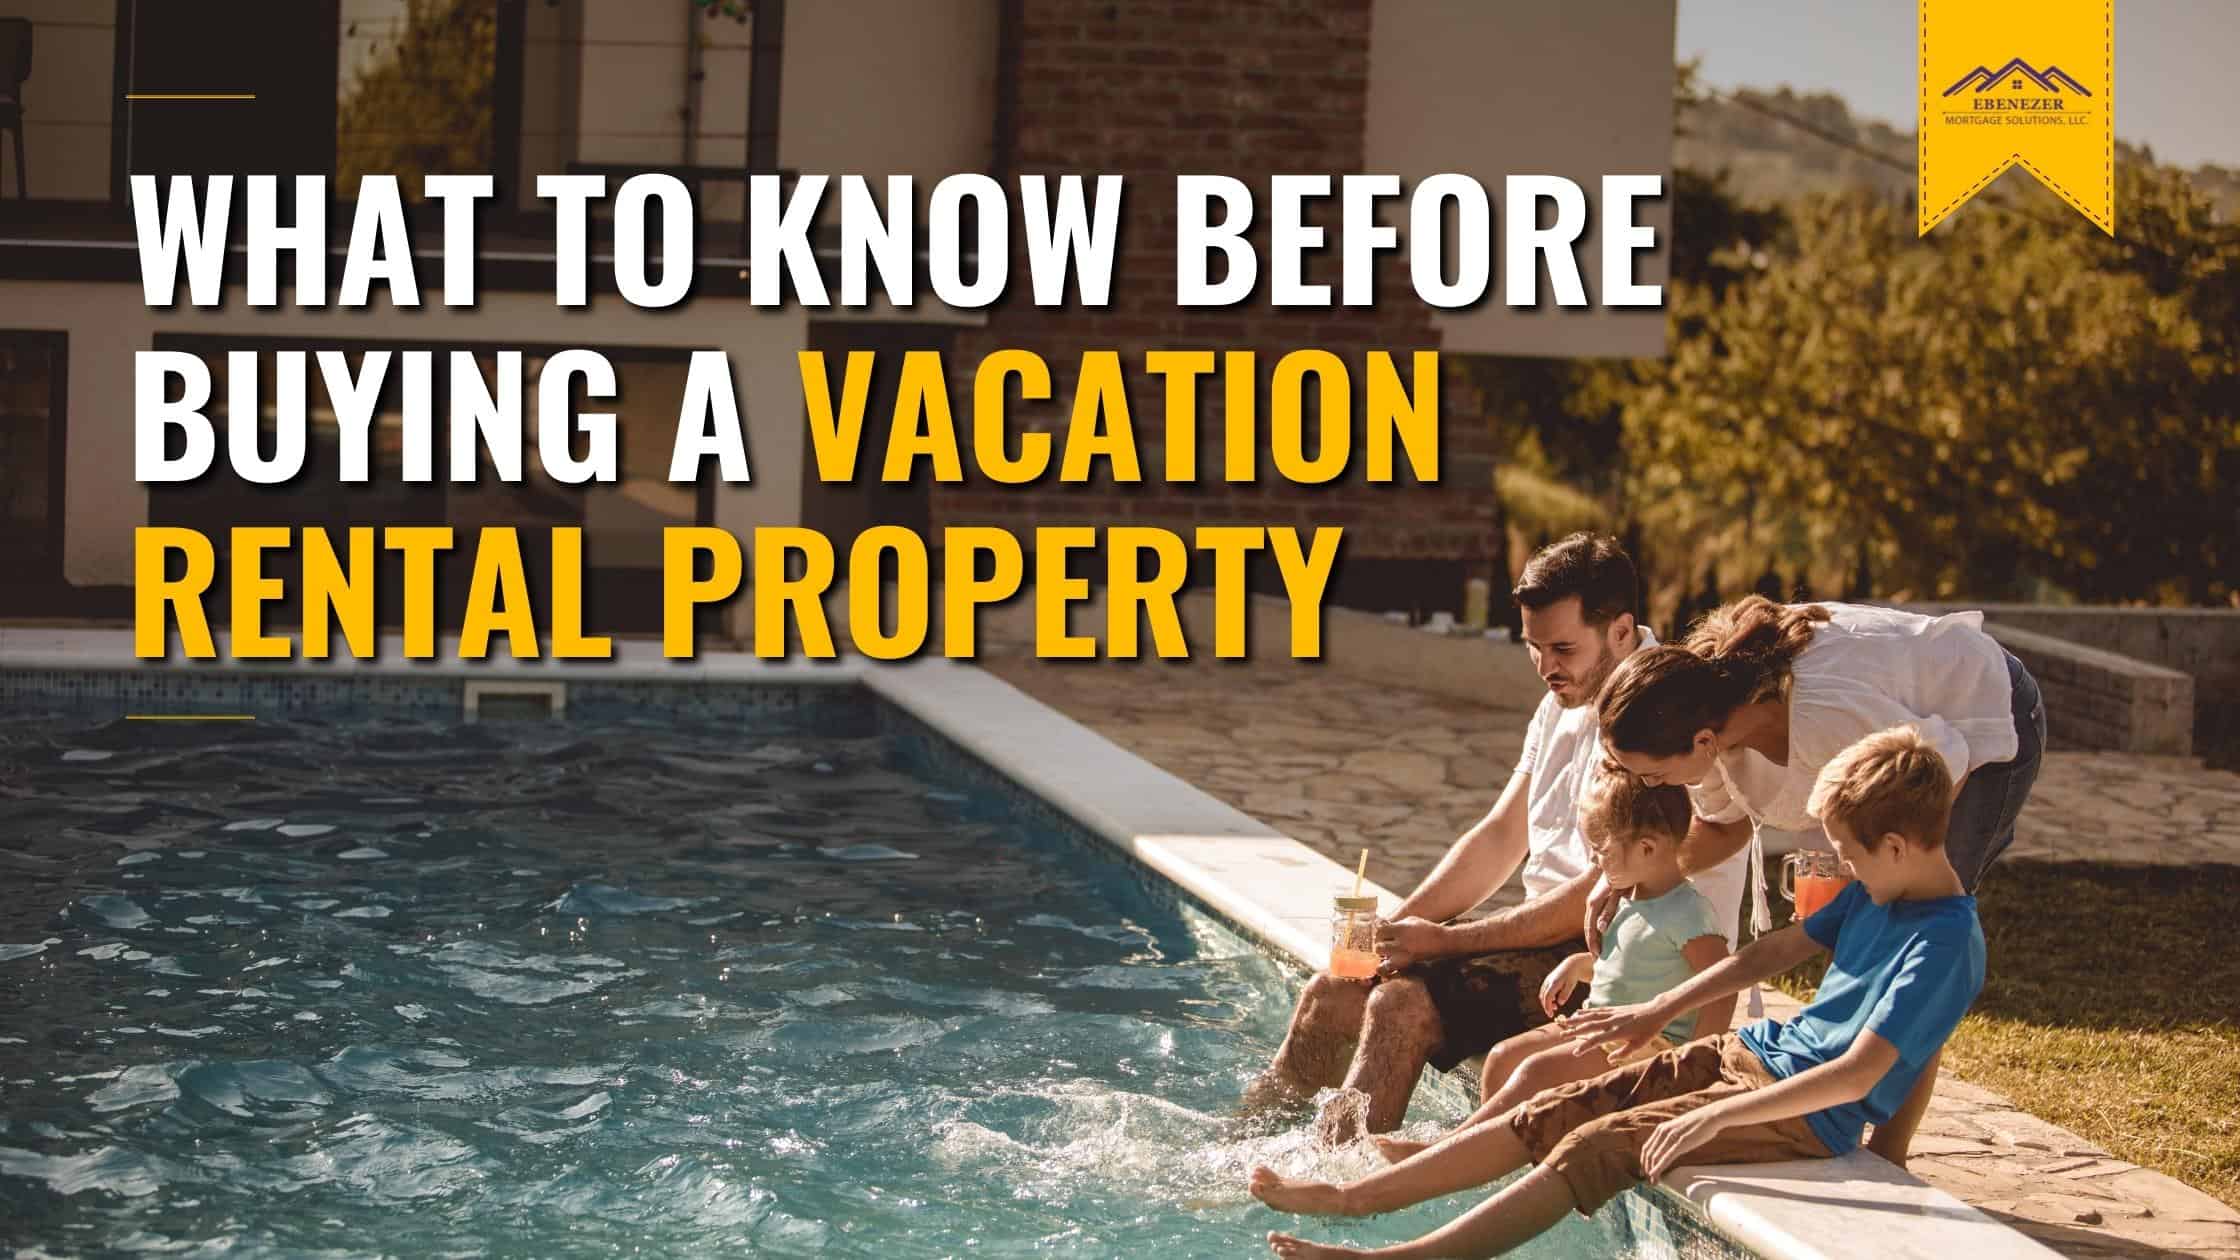 EMS Blog 1 Banner - What To Know Before Buying A Vacation Rental Property